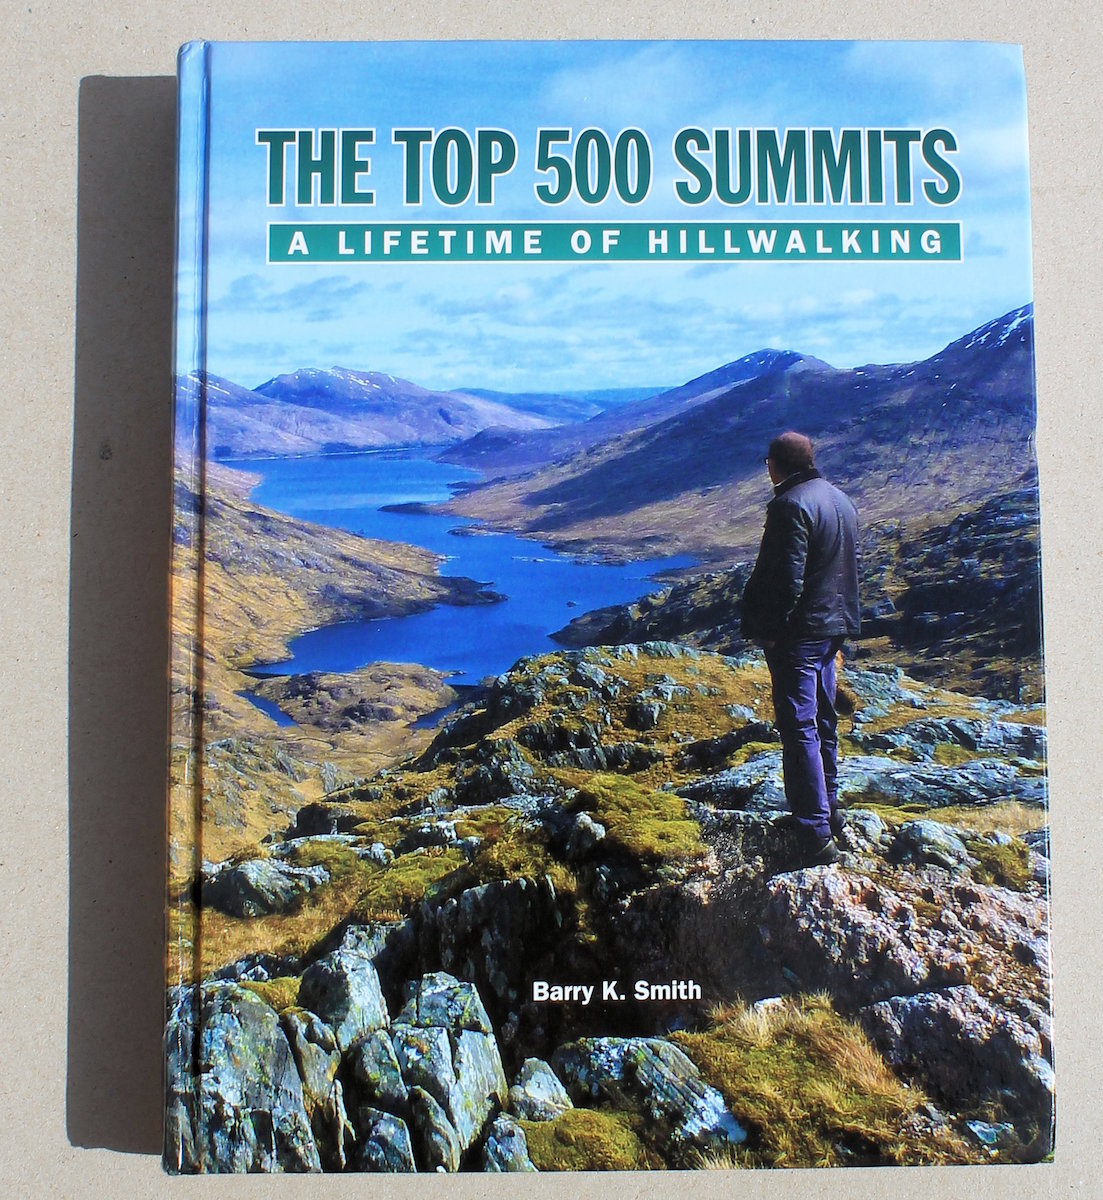 The Top 500 Summits: A Lifetime of Hillwalking by Barry K. Smith